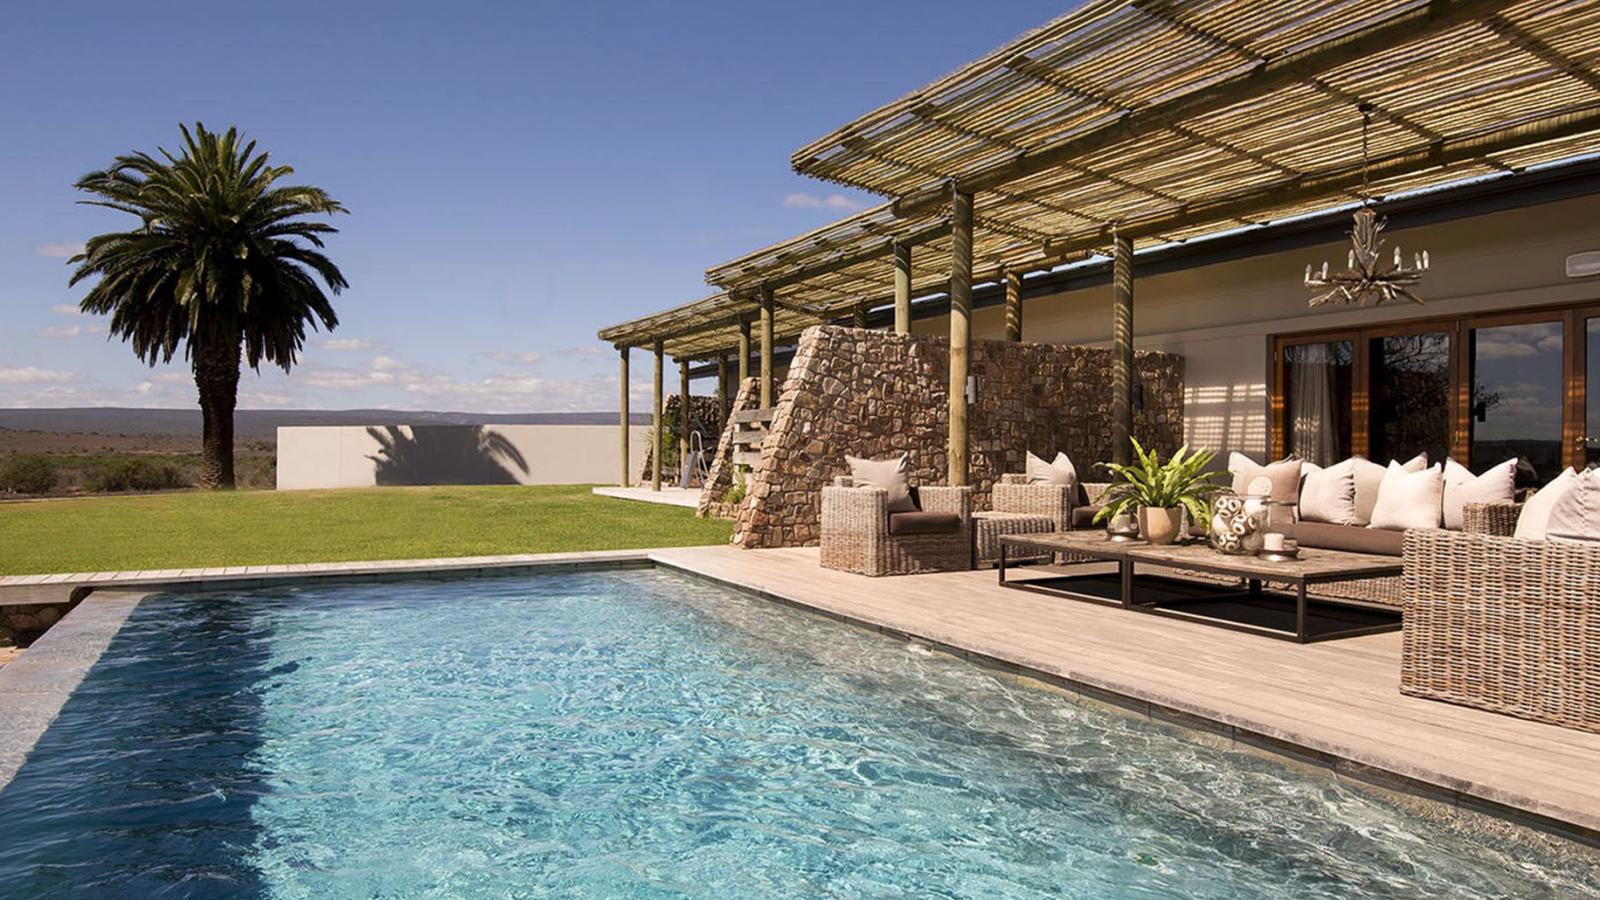 Five of our favourite private houses in South Africa